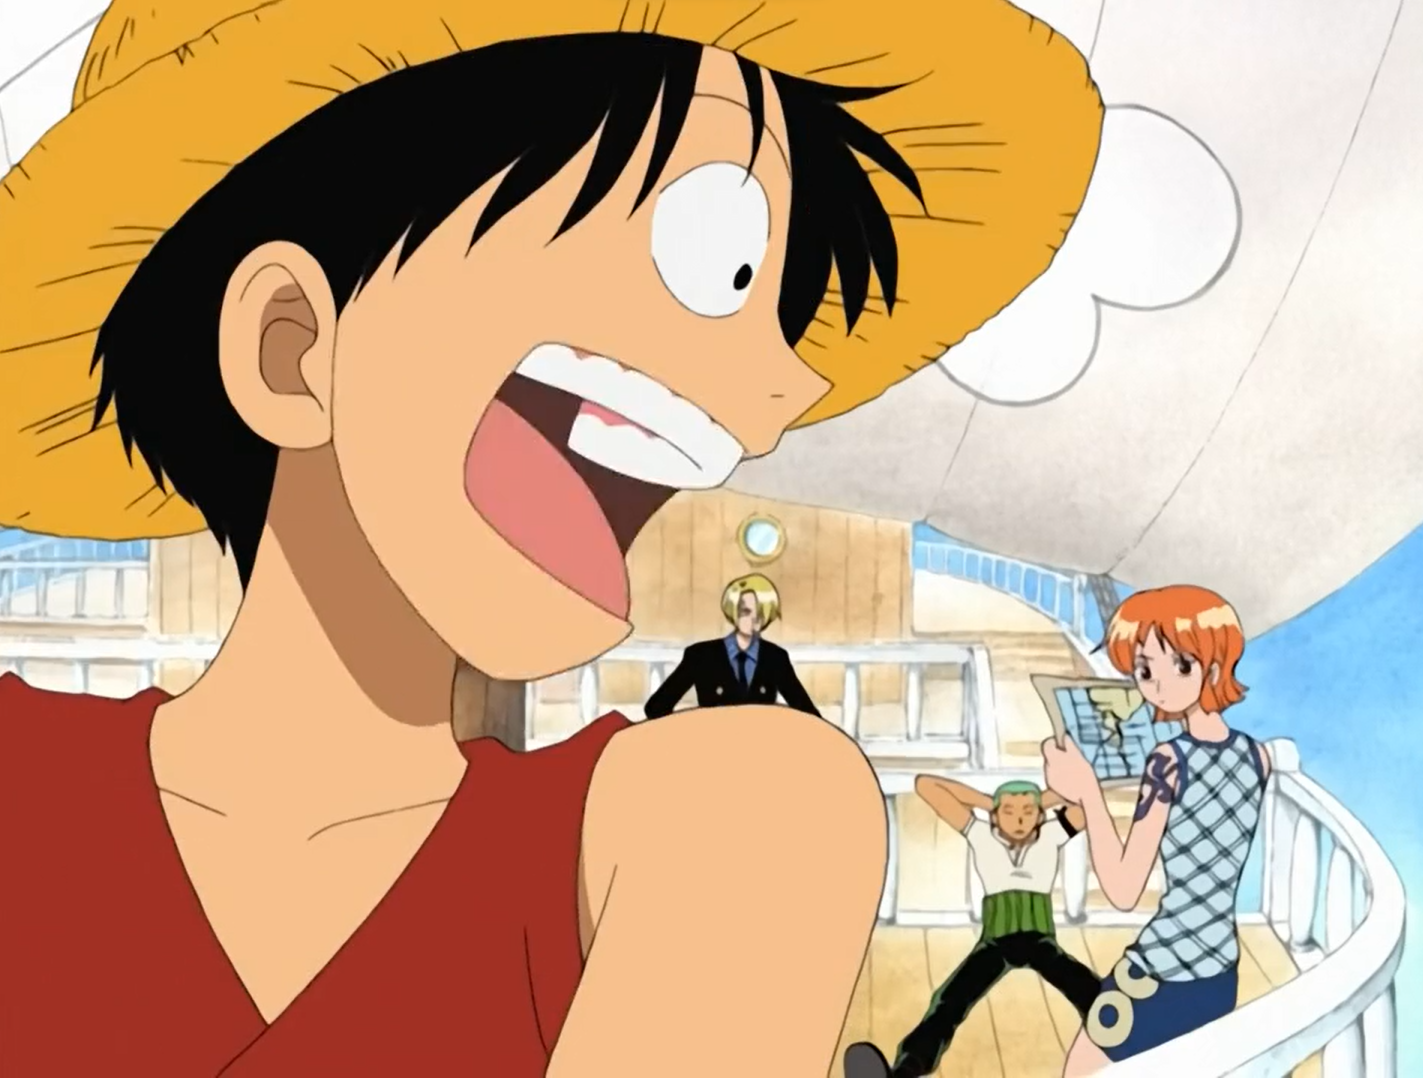 One Piece Luffy and his crew on the deck of the Going Merry